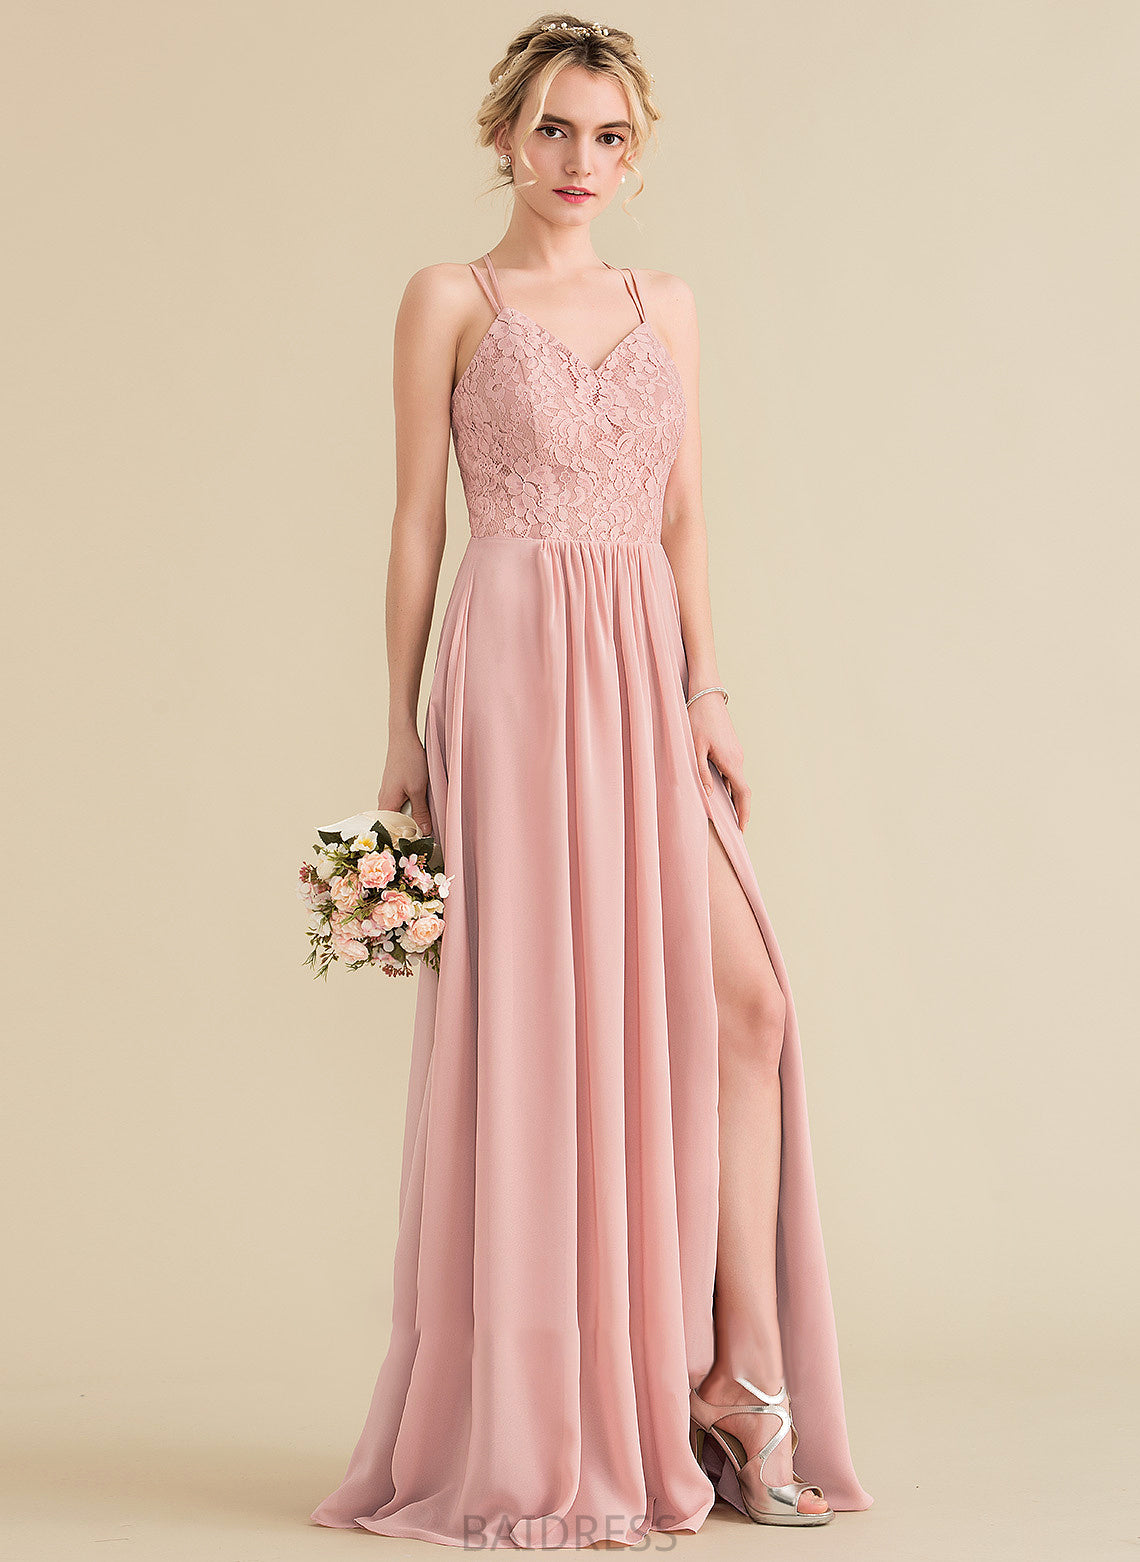 A-Line Split Prom Dresses Front Chiffon Madilynn Lace With Floor-Length Sweetheart